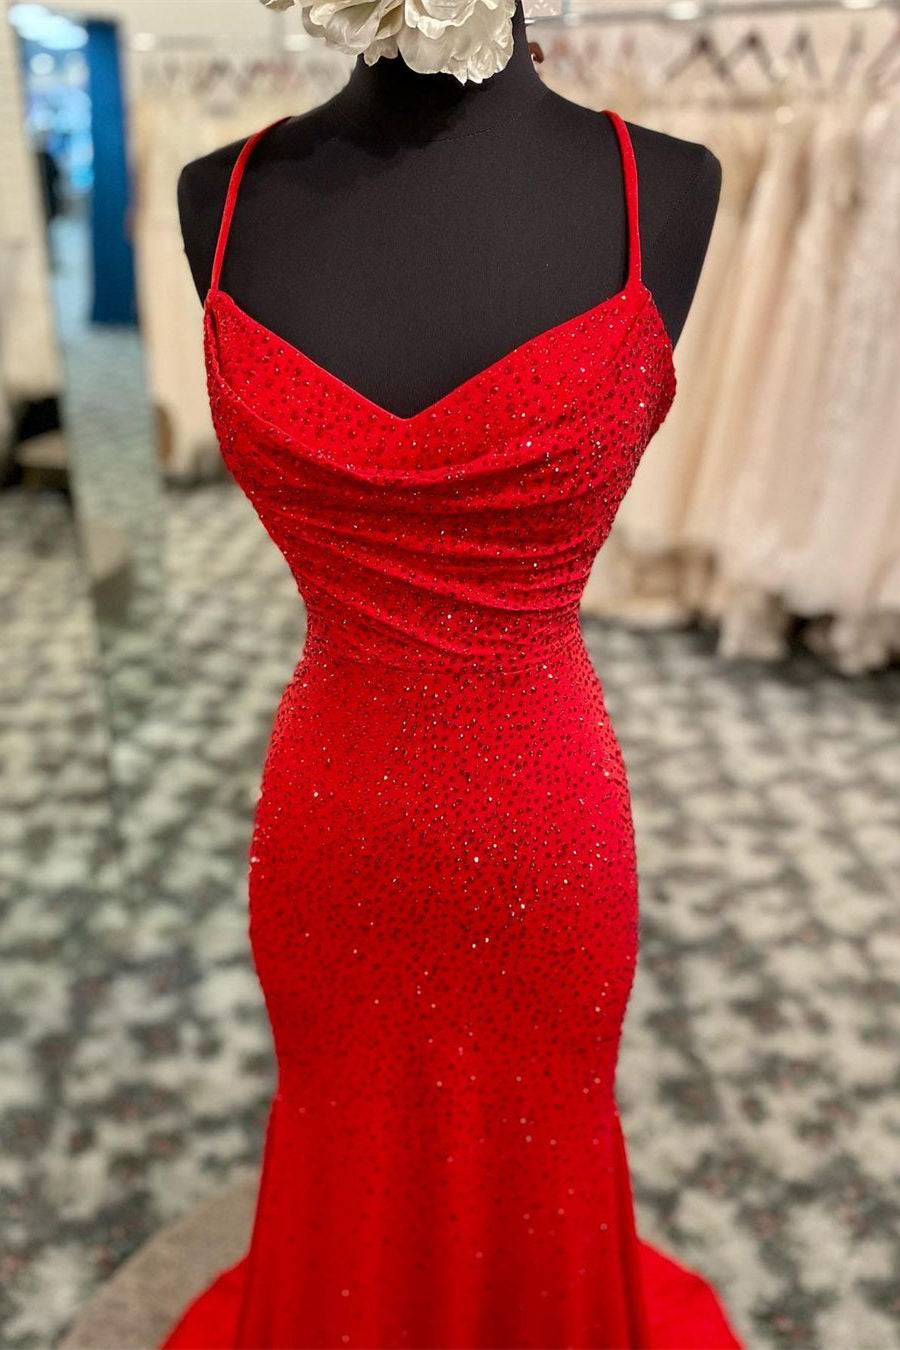 Mermaid Long Red Prom Dress Outfits For Women with Rhinestones,Royal Blue Bodycon Dresses